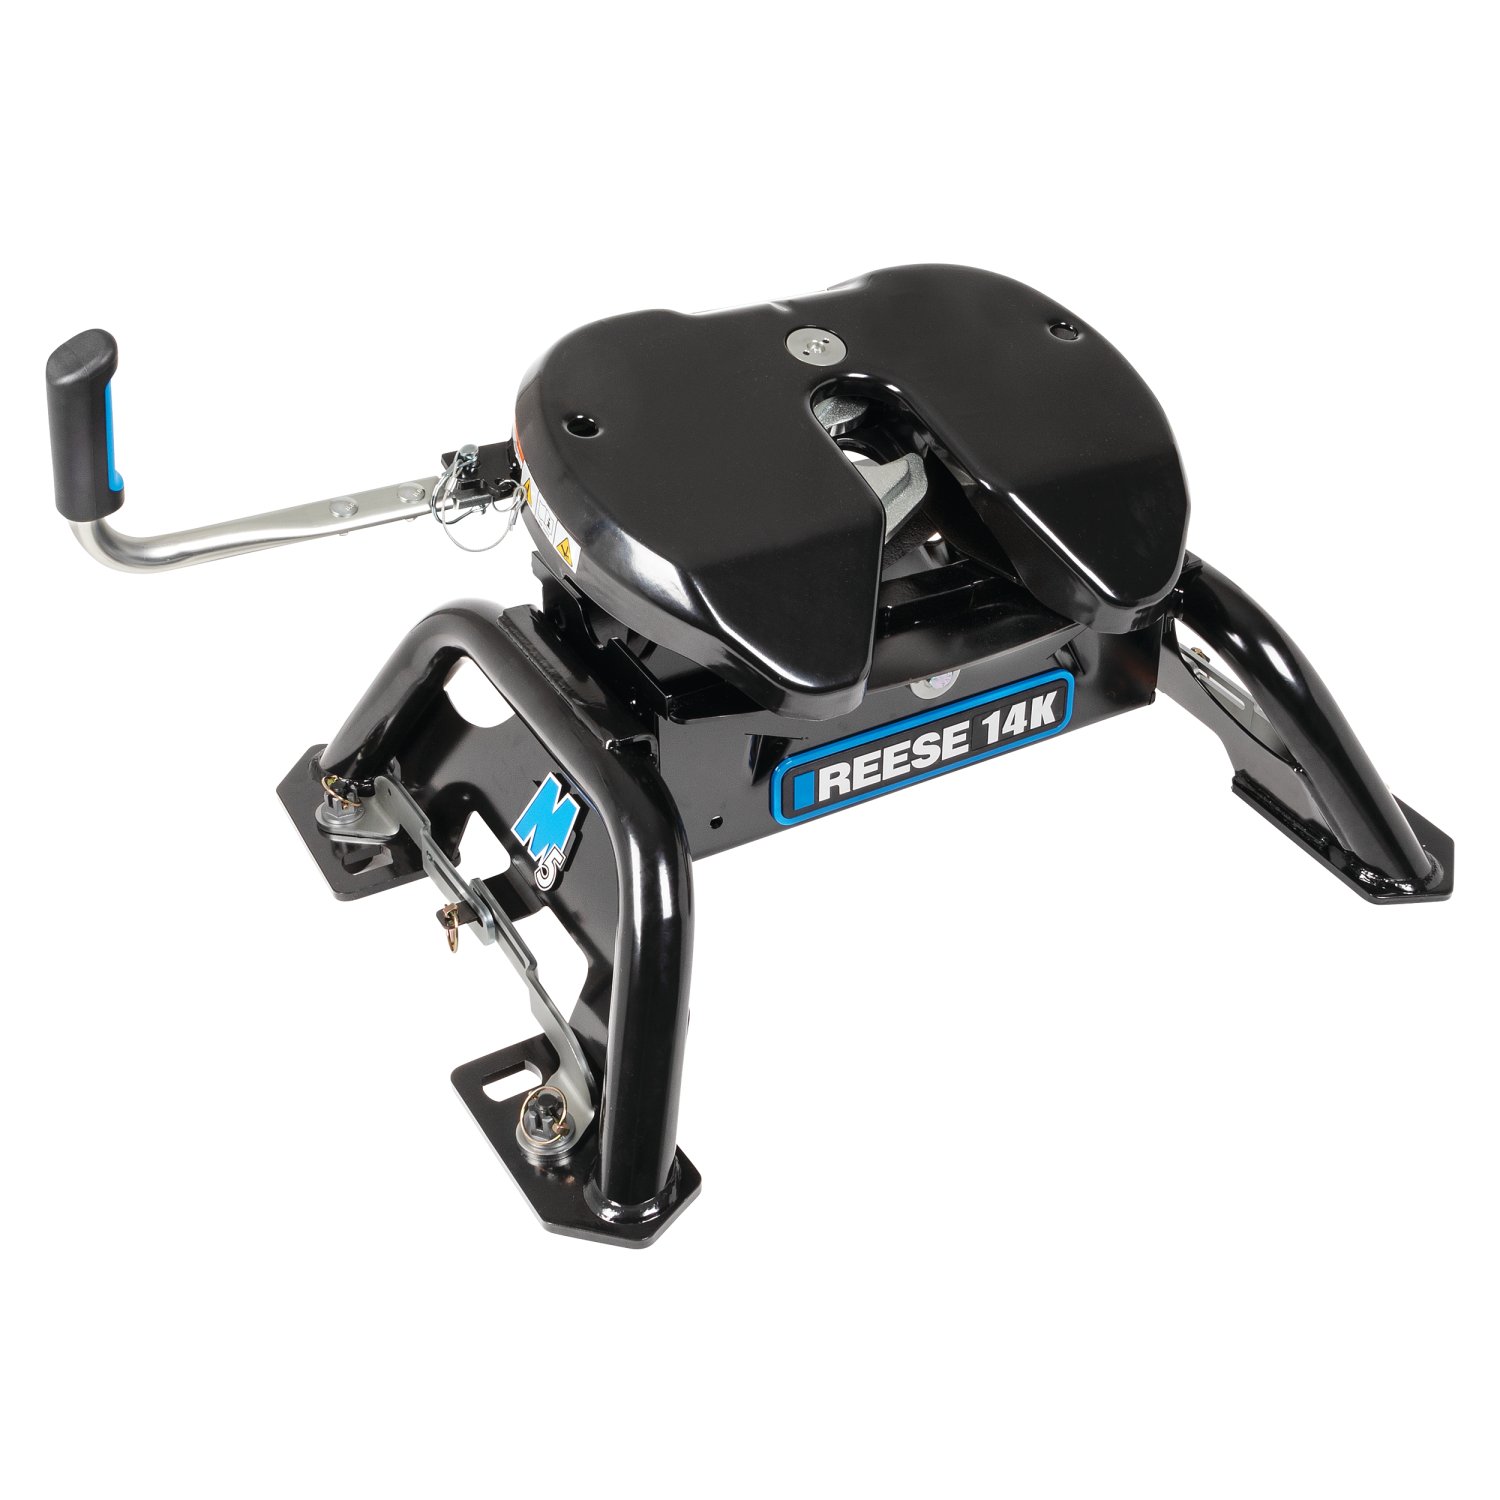 Reese M5  Max Duty  Fifth Wheel Hitch, 14,000 lbs. capacity, Exclusive use with REESE  Max Duty  Underbed Mounting System